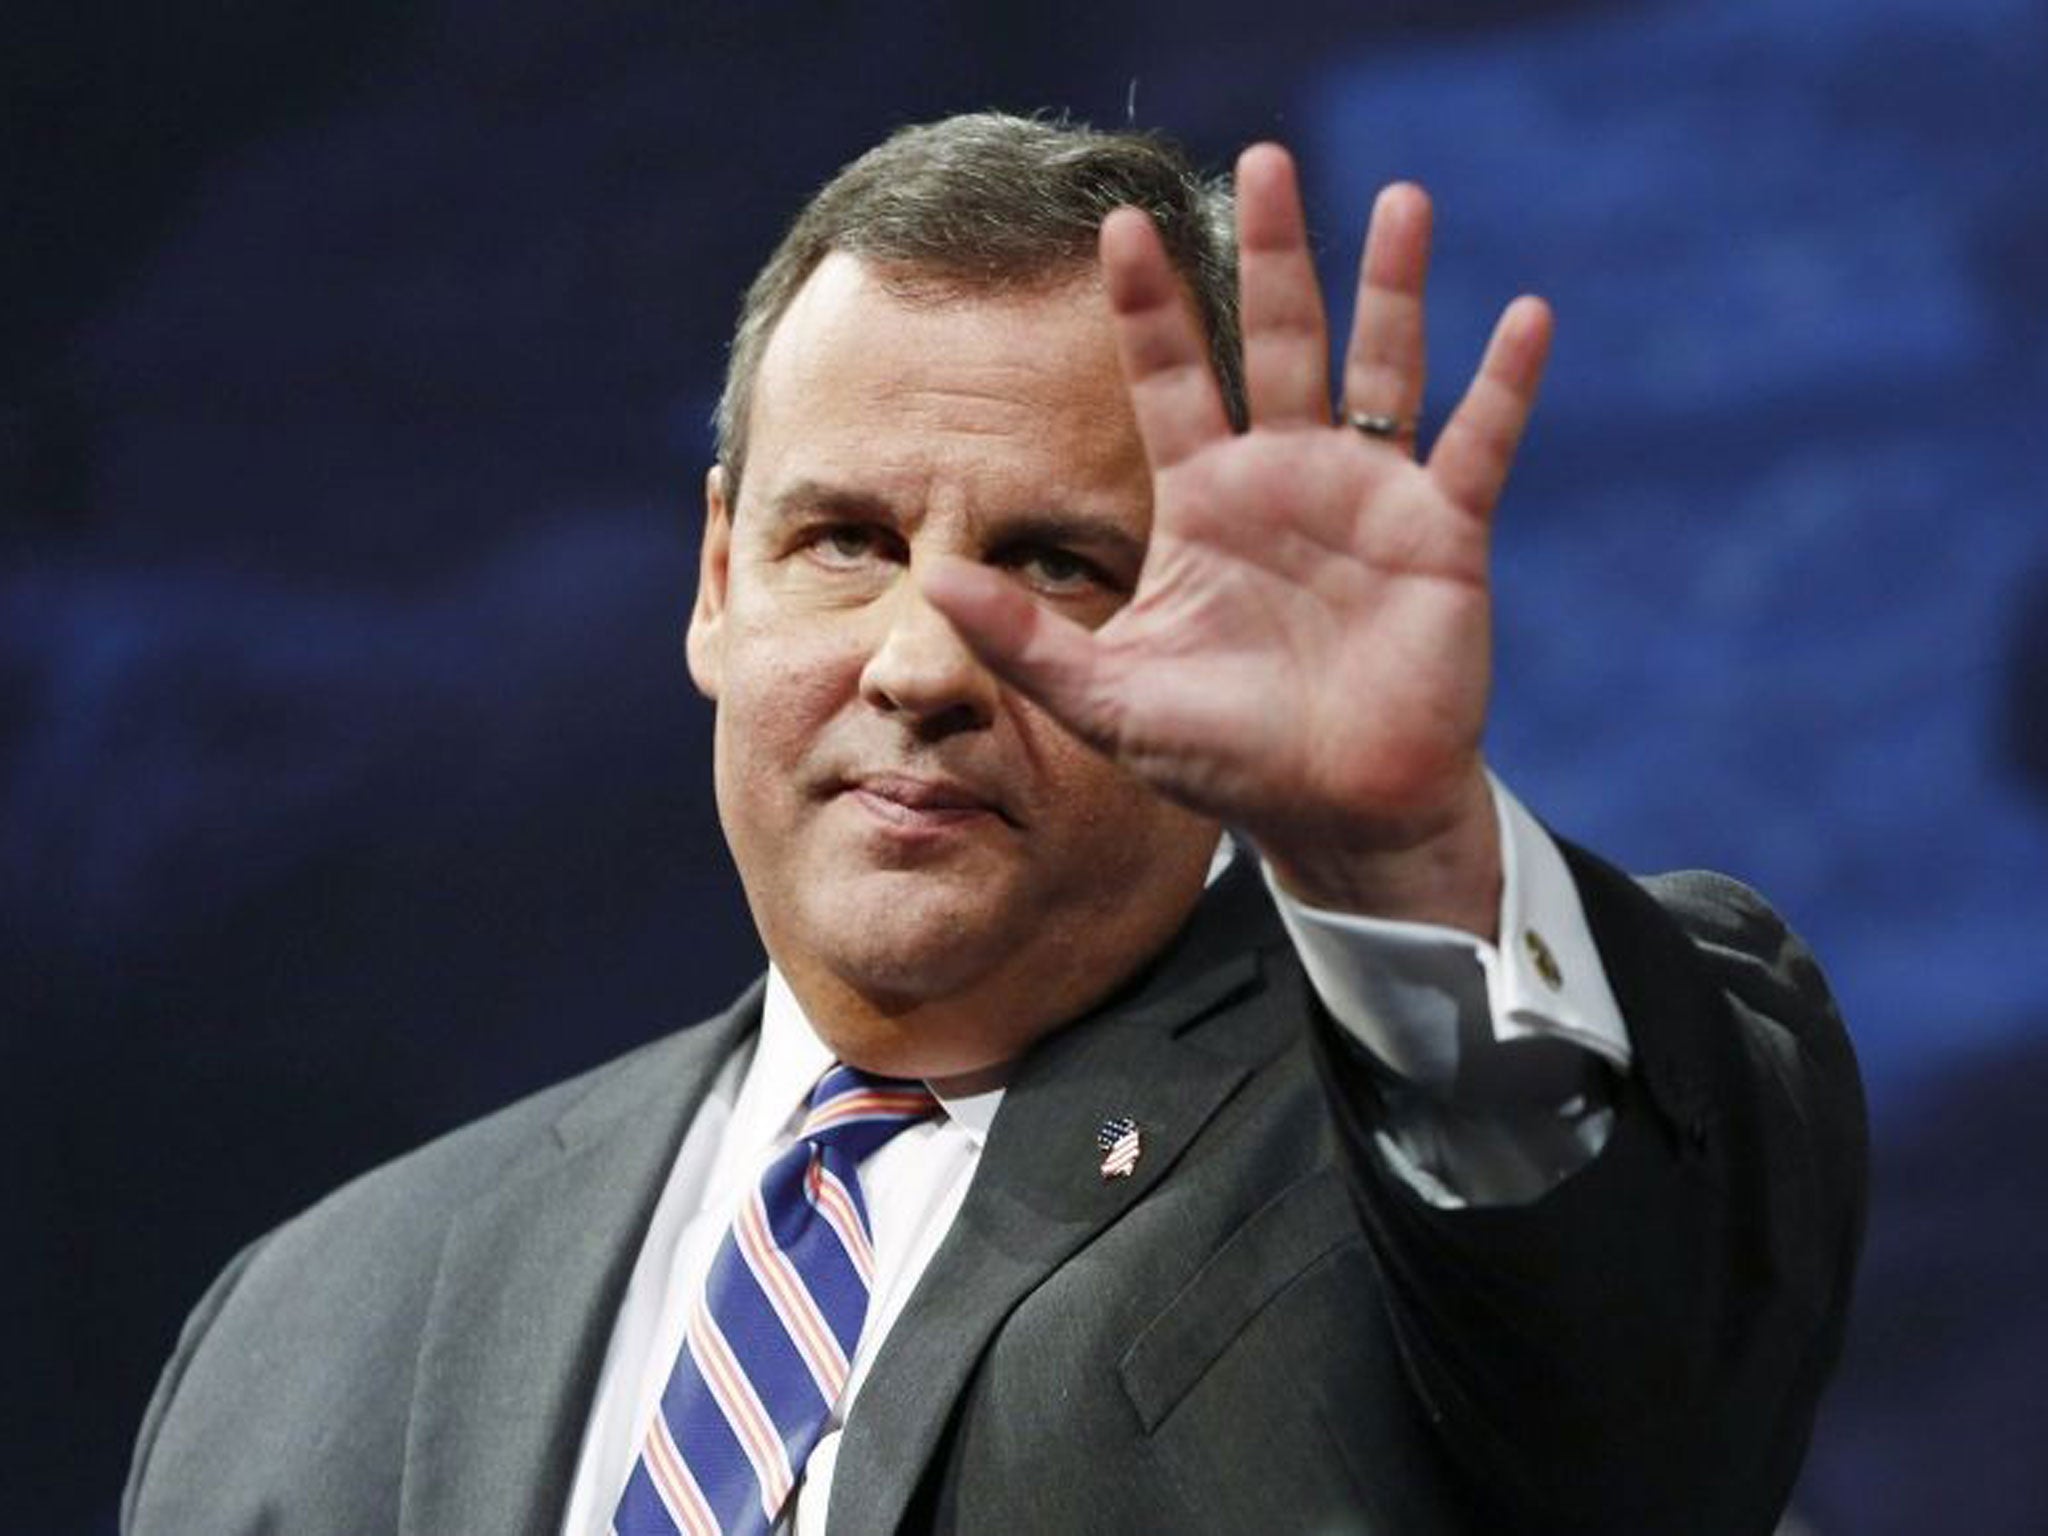 New Jersey Gov. Chris Christie delivers his inaugural address after being sworn in for his second term last month